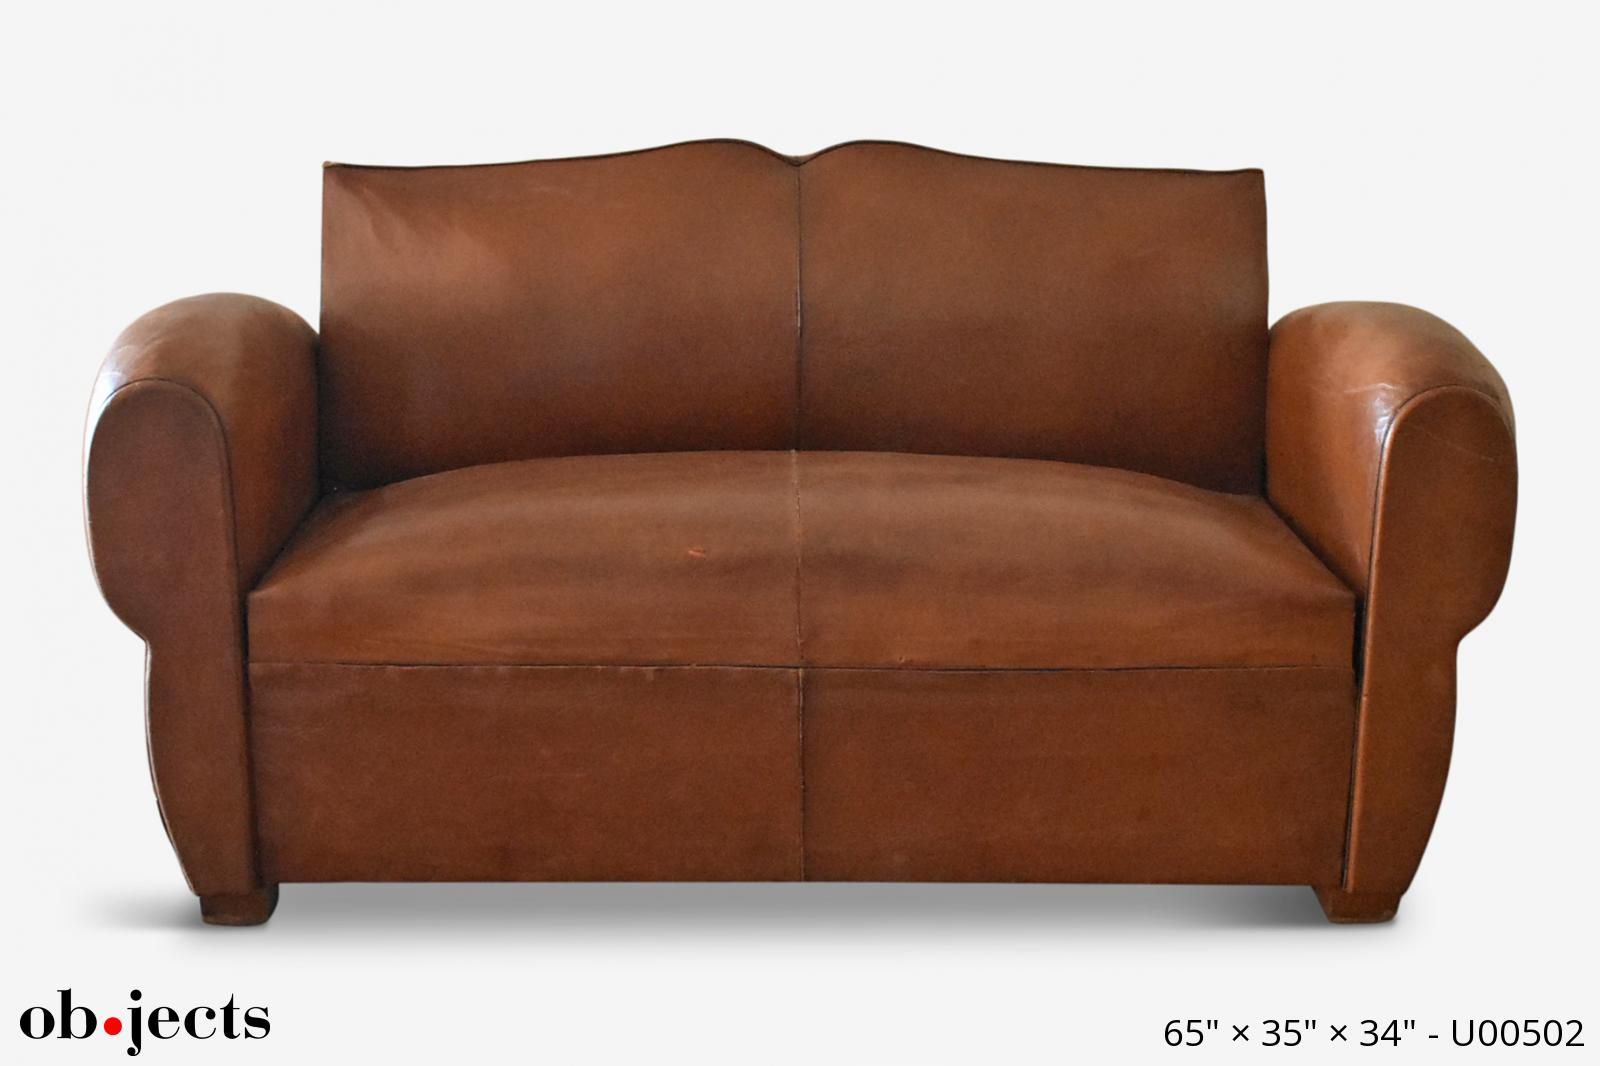 Loveseat Vintage French Leather, Antique Leather Loveseat